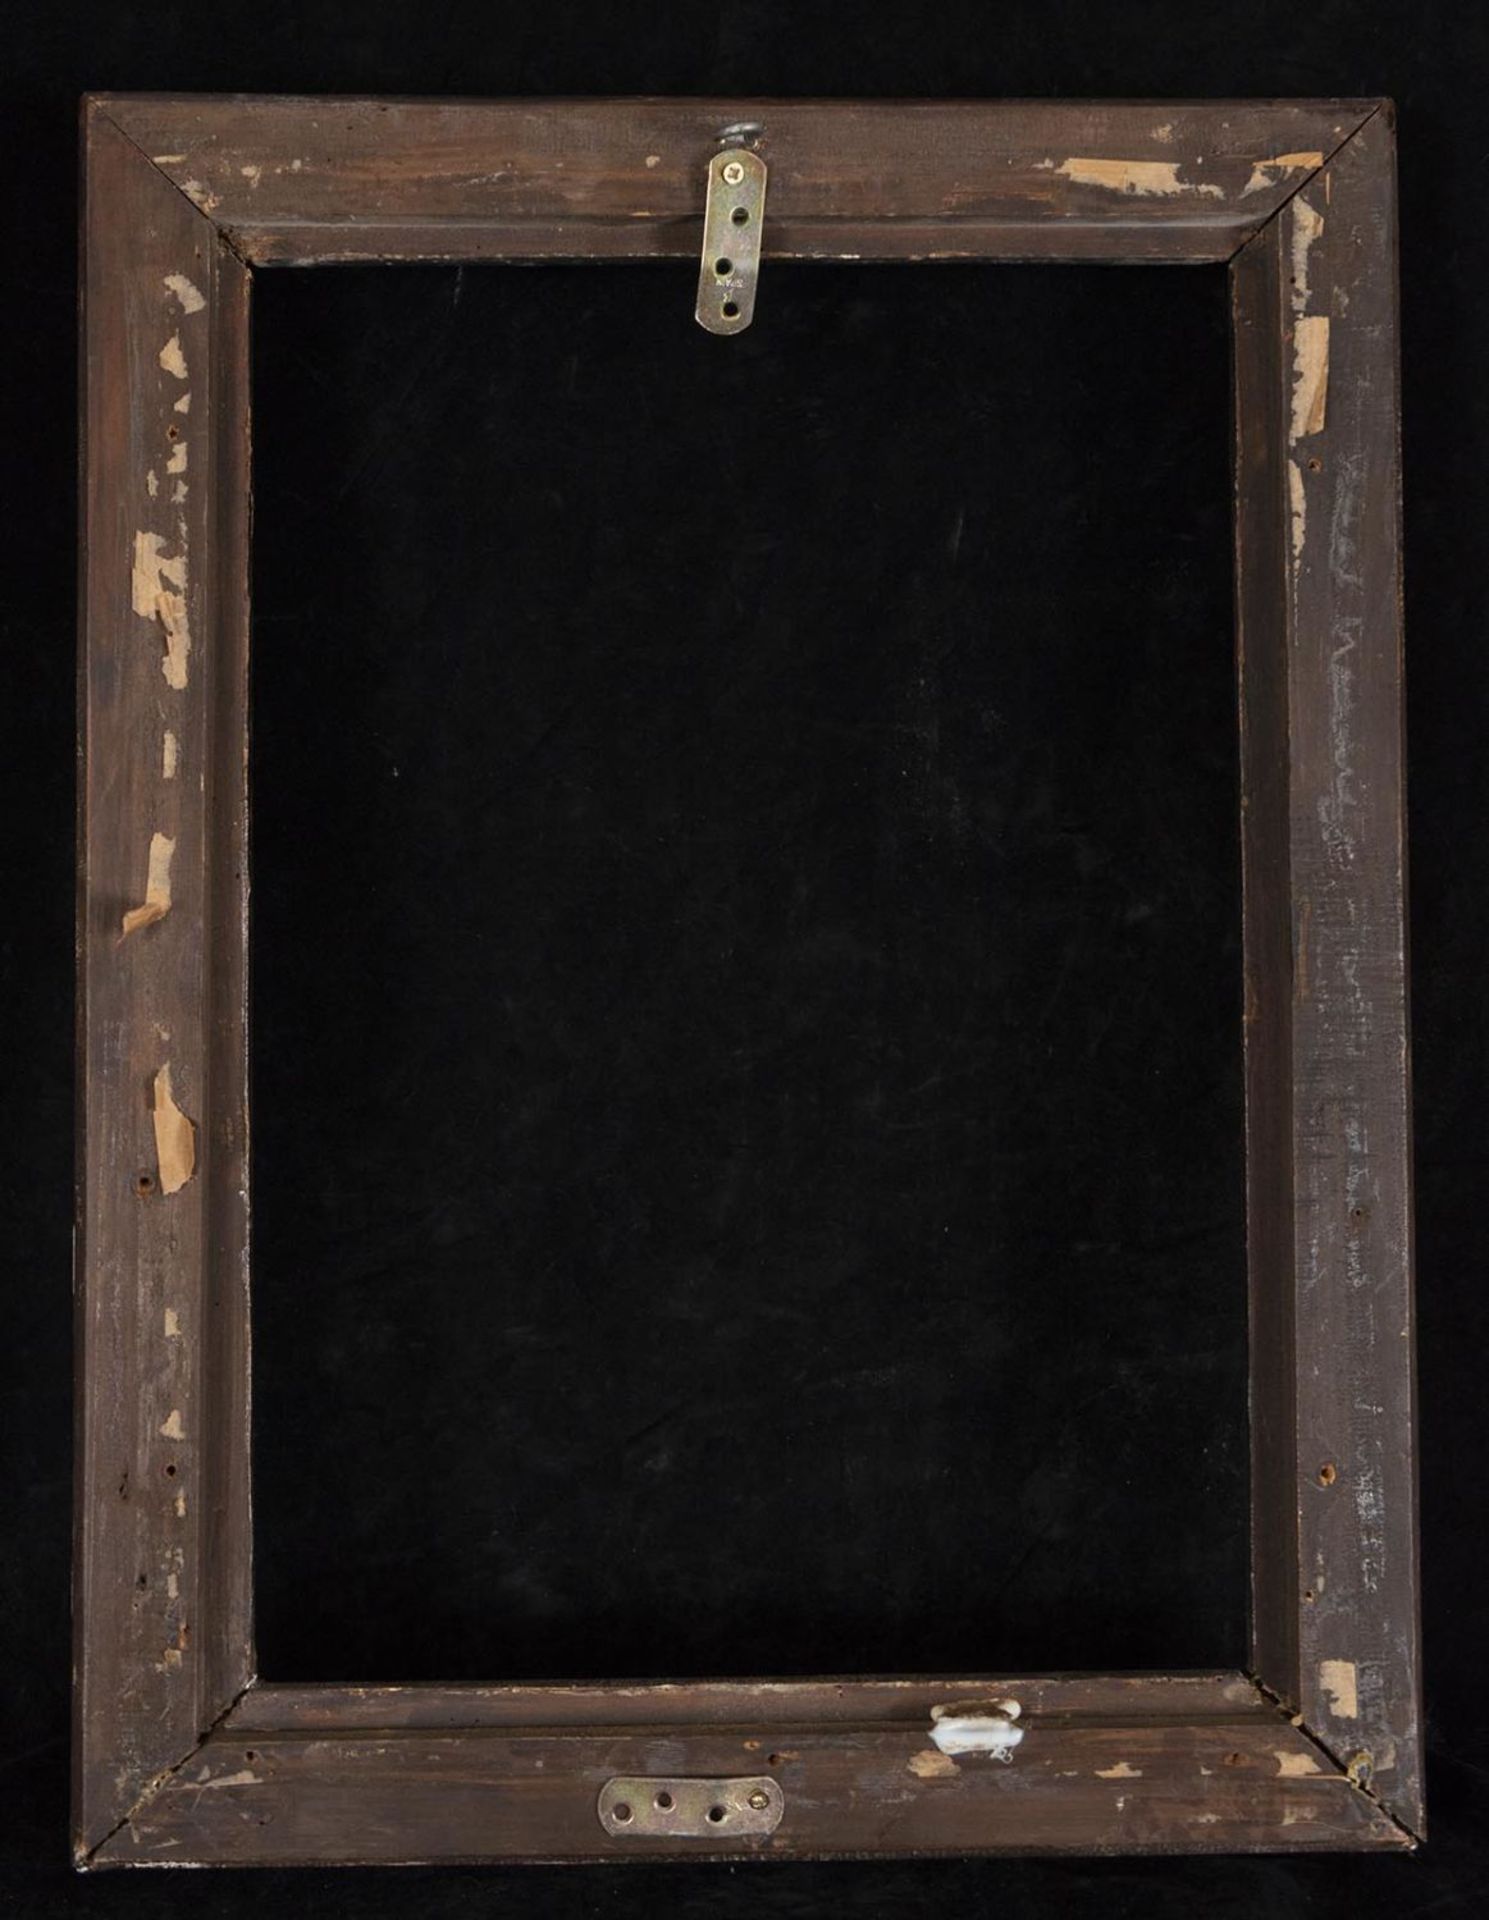 Important Spanish Baroque frame in wood gilded with gold leaf, 17th century - Bild 3 aus 3